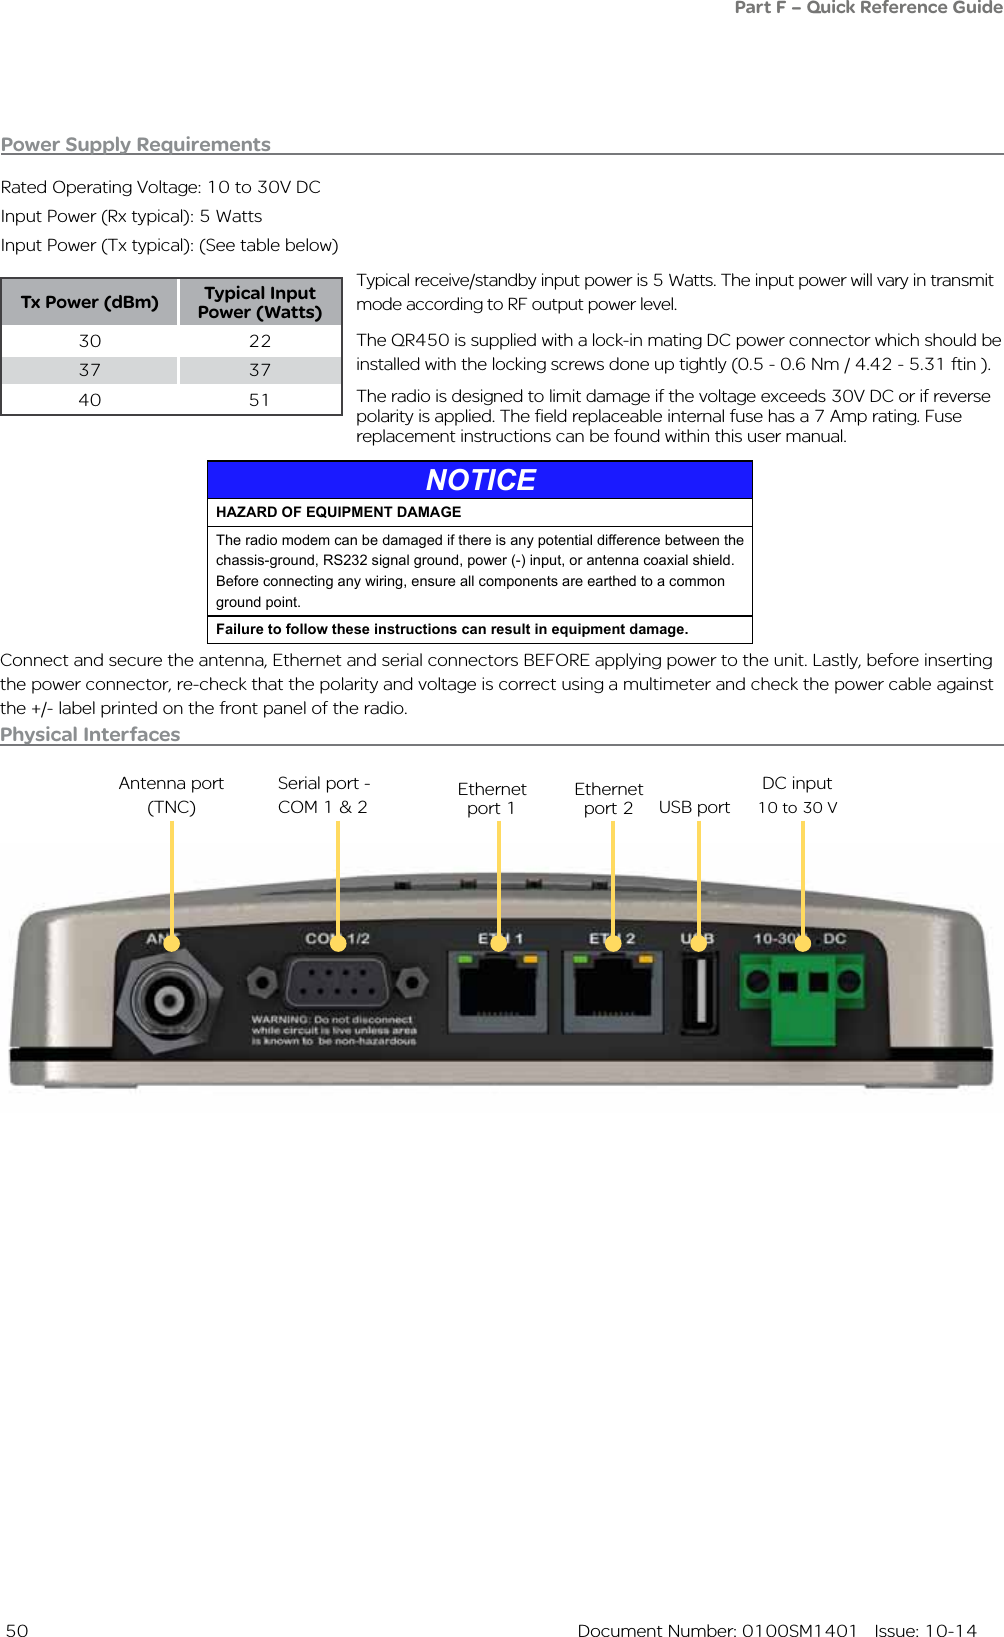  50  Document Number: 0100SM1401   Issue: 10-14Physical InterfacesAntenna port (TNC)Serial port - COM 1 &amp; 2 Ethernet         USB port DC input 10 to 30 Vport 1Ethernet        port 2Power Supply RequirementsRated Operating Voltage: 10 to 30V DCInput Power (Rx typical): 5 Watts Input Power (Tx typical): (See table below)Typical receive/standby input power is 5 Watts. The input power will vary in transmit mode according to RF output power level.The QR450 is supplied with a lock-in mating DC power connector which should be installed with the locking screws done up tightly (0.5 - 0.6 Nm / 4.42 - 5.31 ftin ). The radio is designed to limit damage if the voltage exceeds 30V DC or if reverse polarity is applied. The field replaceable internal fuse has a 7 Amp rating. Fuse replacement instructions can be found within this user manual. Tx Power (dBm) Typical Input Power (Watts)30 2237 3740 51Connect and secure the antenna, Ethernet and serial connectors BEFORE applying power to the unit. Lastly, before inserting the power connector, re-check that the polarity and voltage is correct using a multimeter and check the power cable against the +/- label printed on the front panel of the radio.Part F – Quick Reference GuideNOTICEHAZARD OF EQUIPMENT DAMAGEThe radio modem can be damaged if there is any potential difference between the chassis-ground, RS232 signal ground, power (-) input, or antenna coaxial shield. Before connecting any wiring, ensure all components are earthed to a common ground point.Failure to follow these instructions can result in equipment damage.